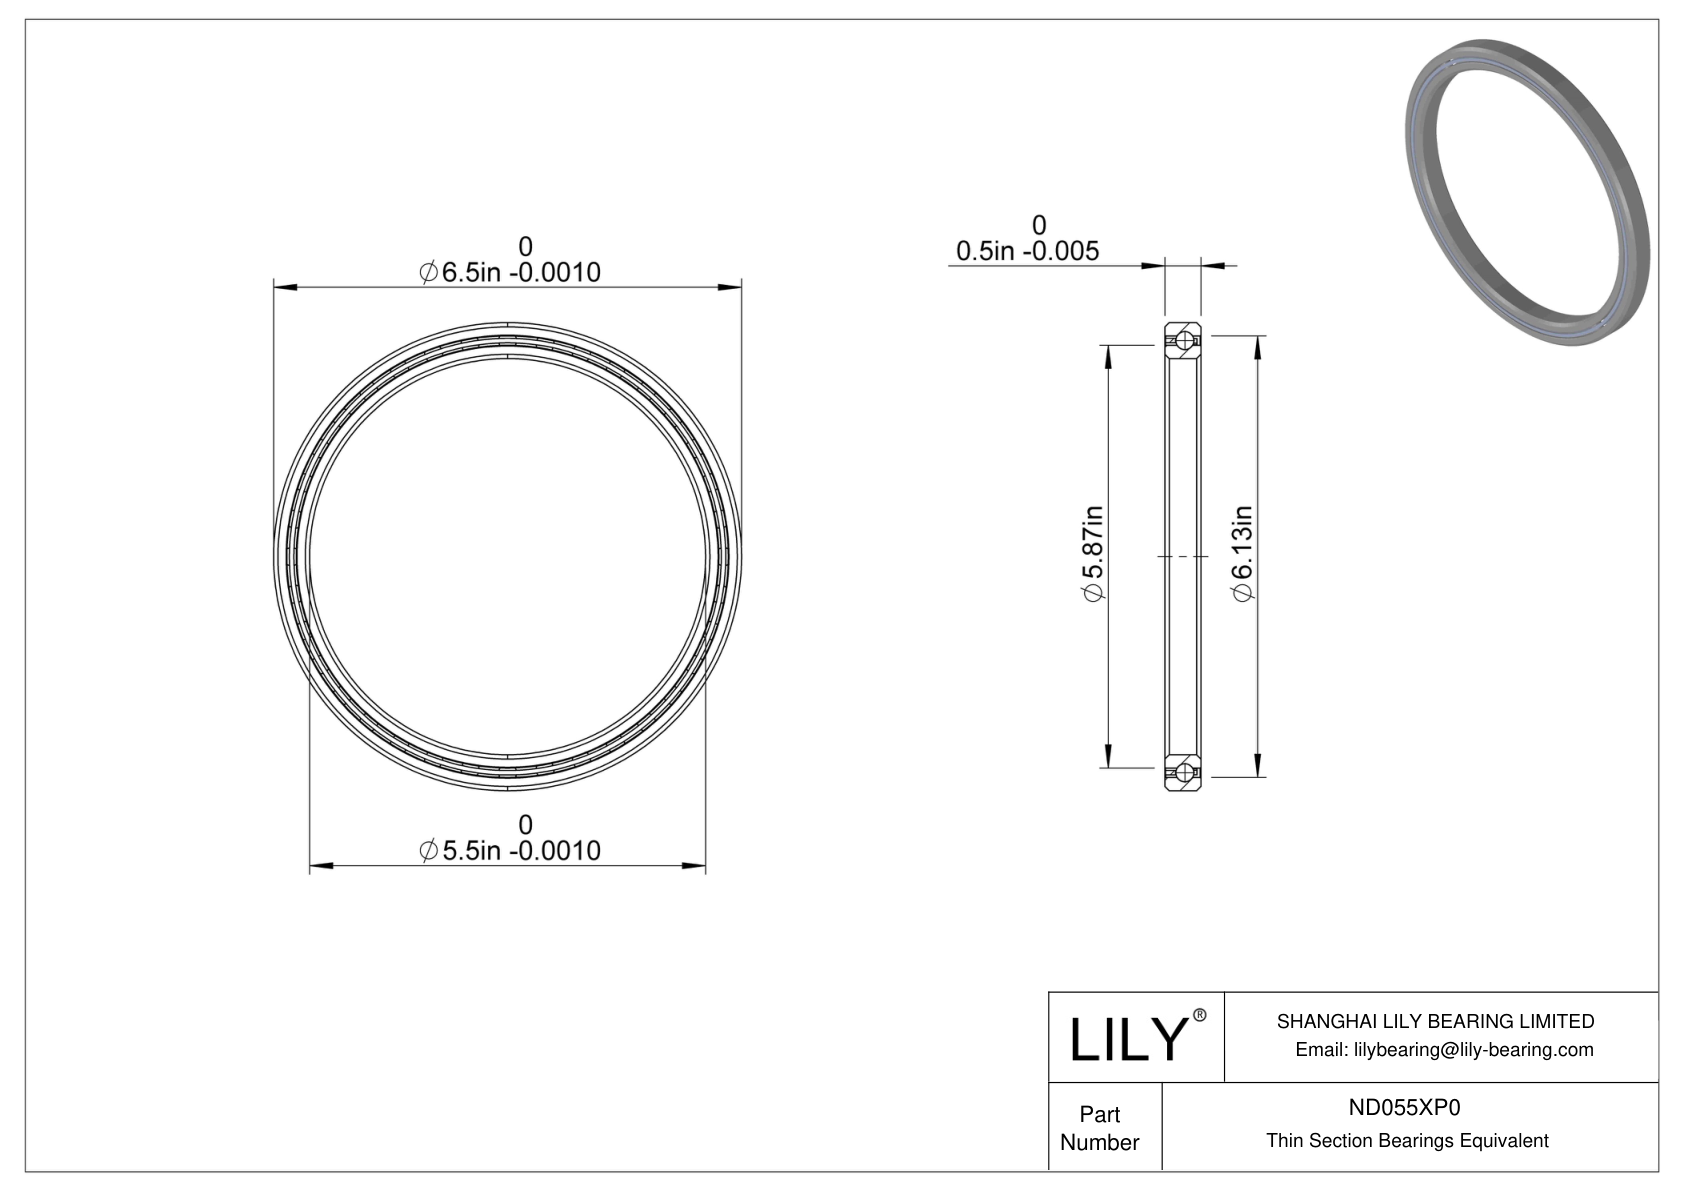 ND055XP0 Constant Section (CS) Bearings cad drawing